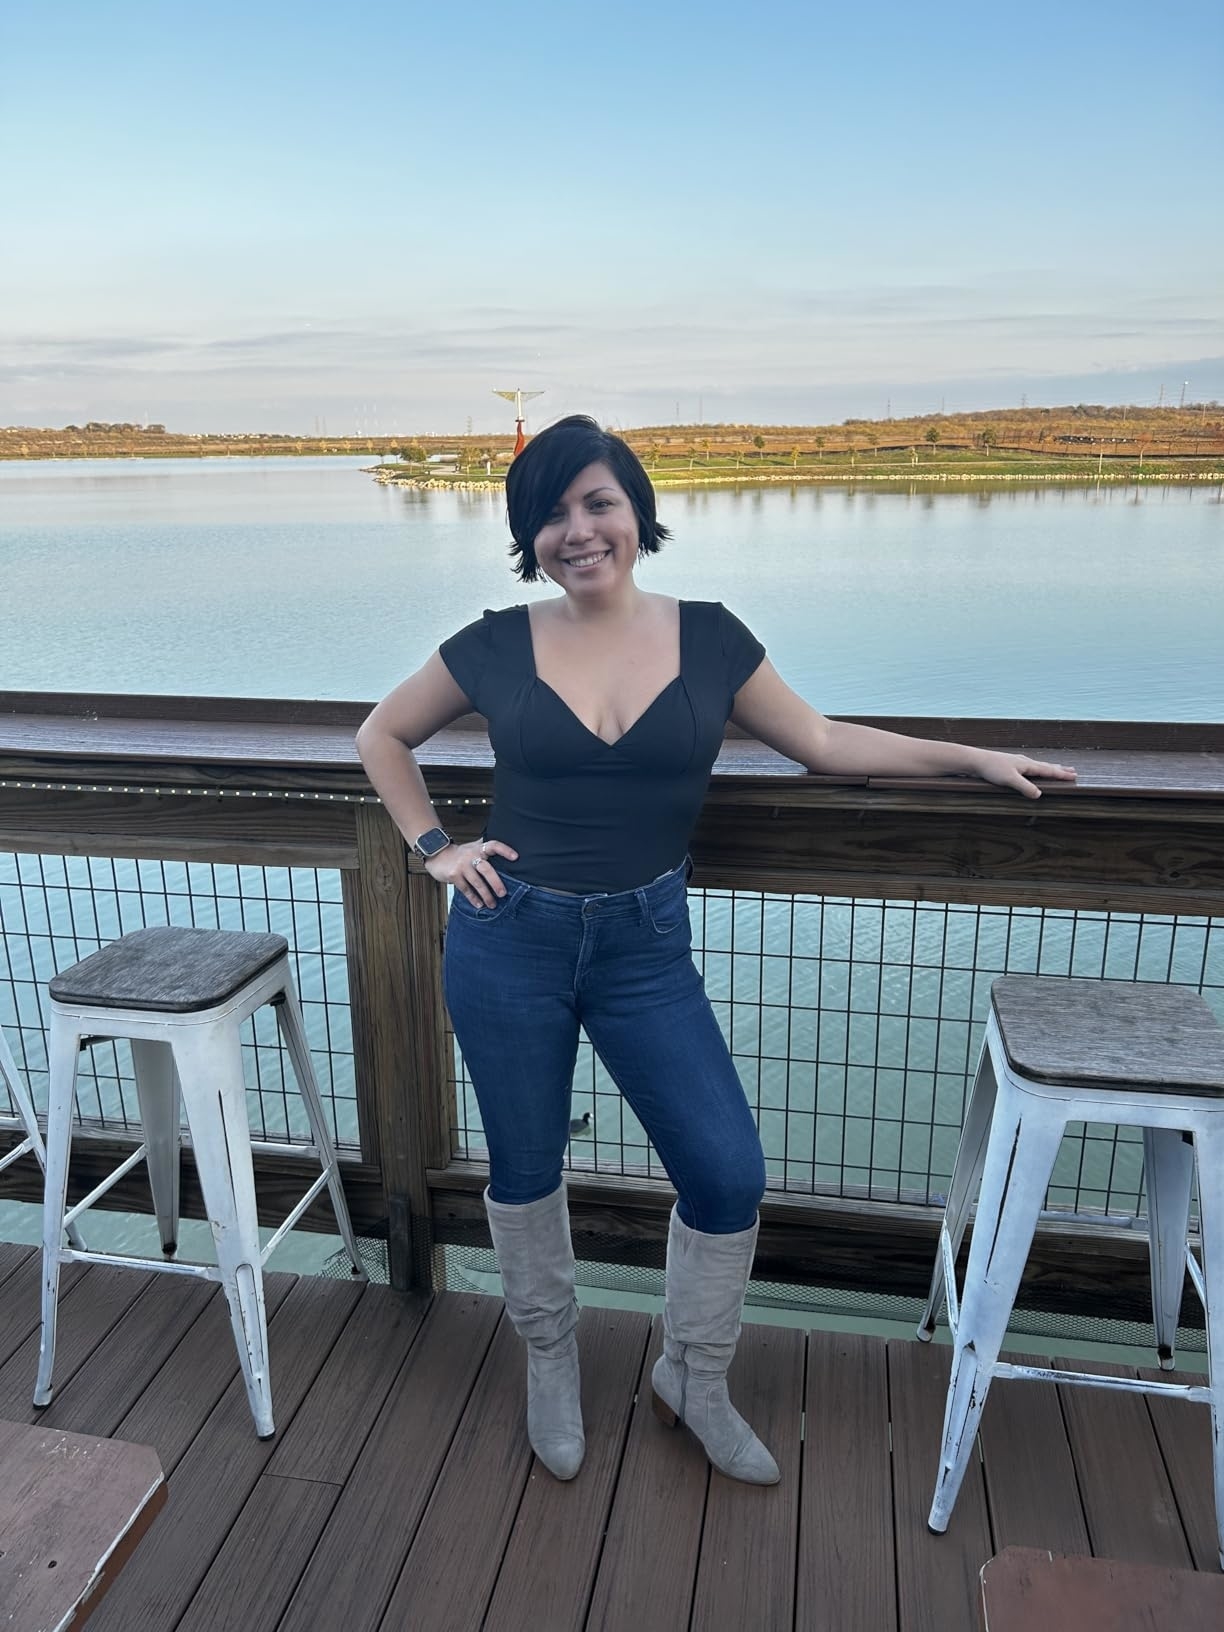 Reviewer in a black corset top, jeans, and knee-high boots poses on a wooden deck with a waterfront view